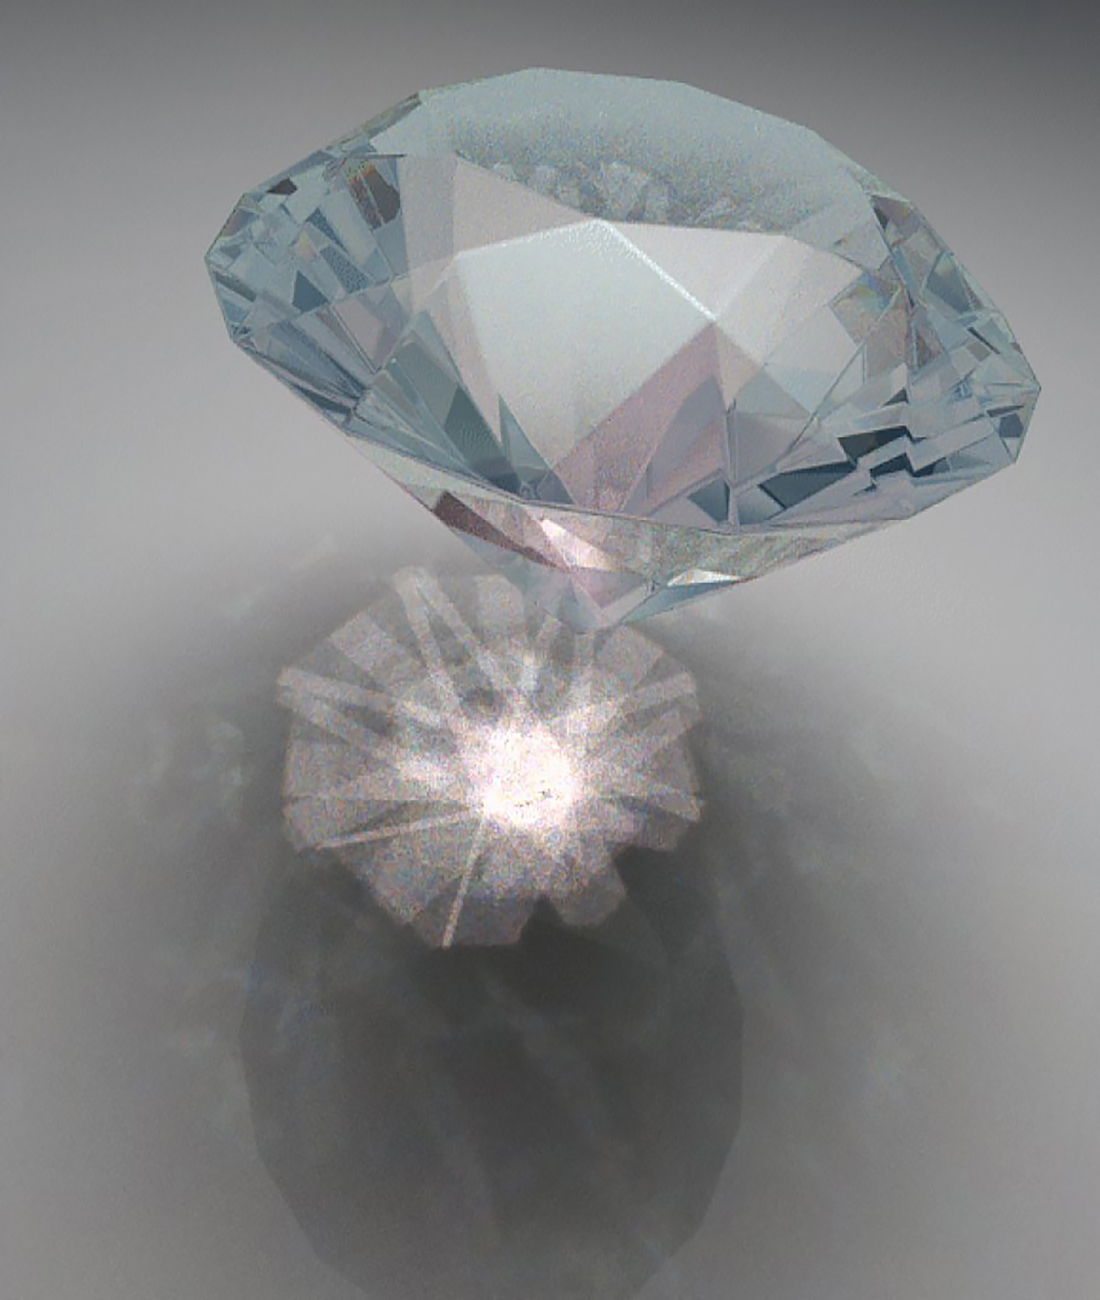 Image of a charming 3d model of a diamond